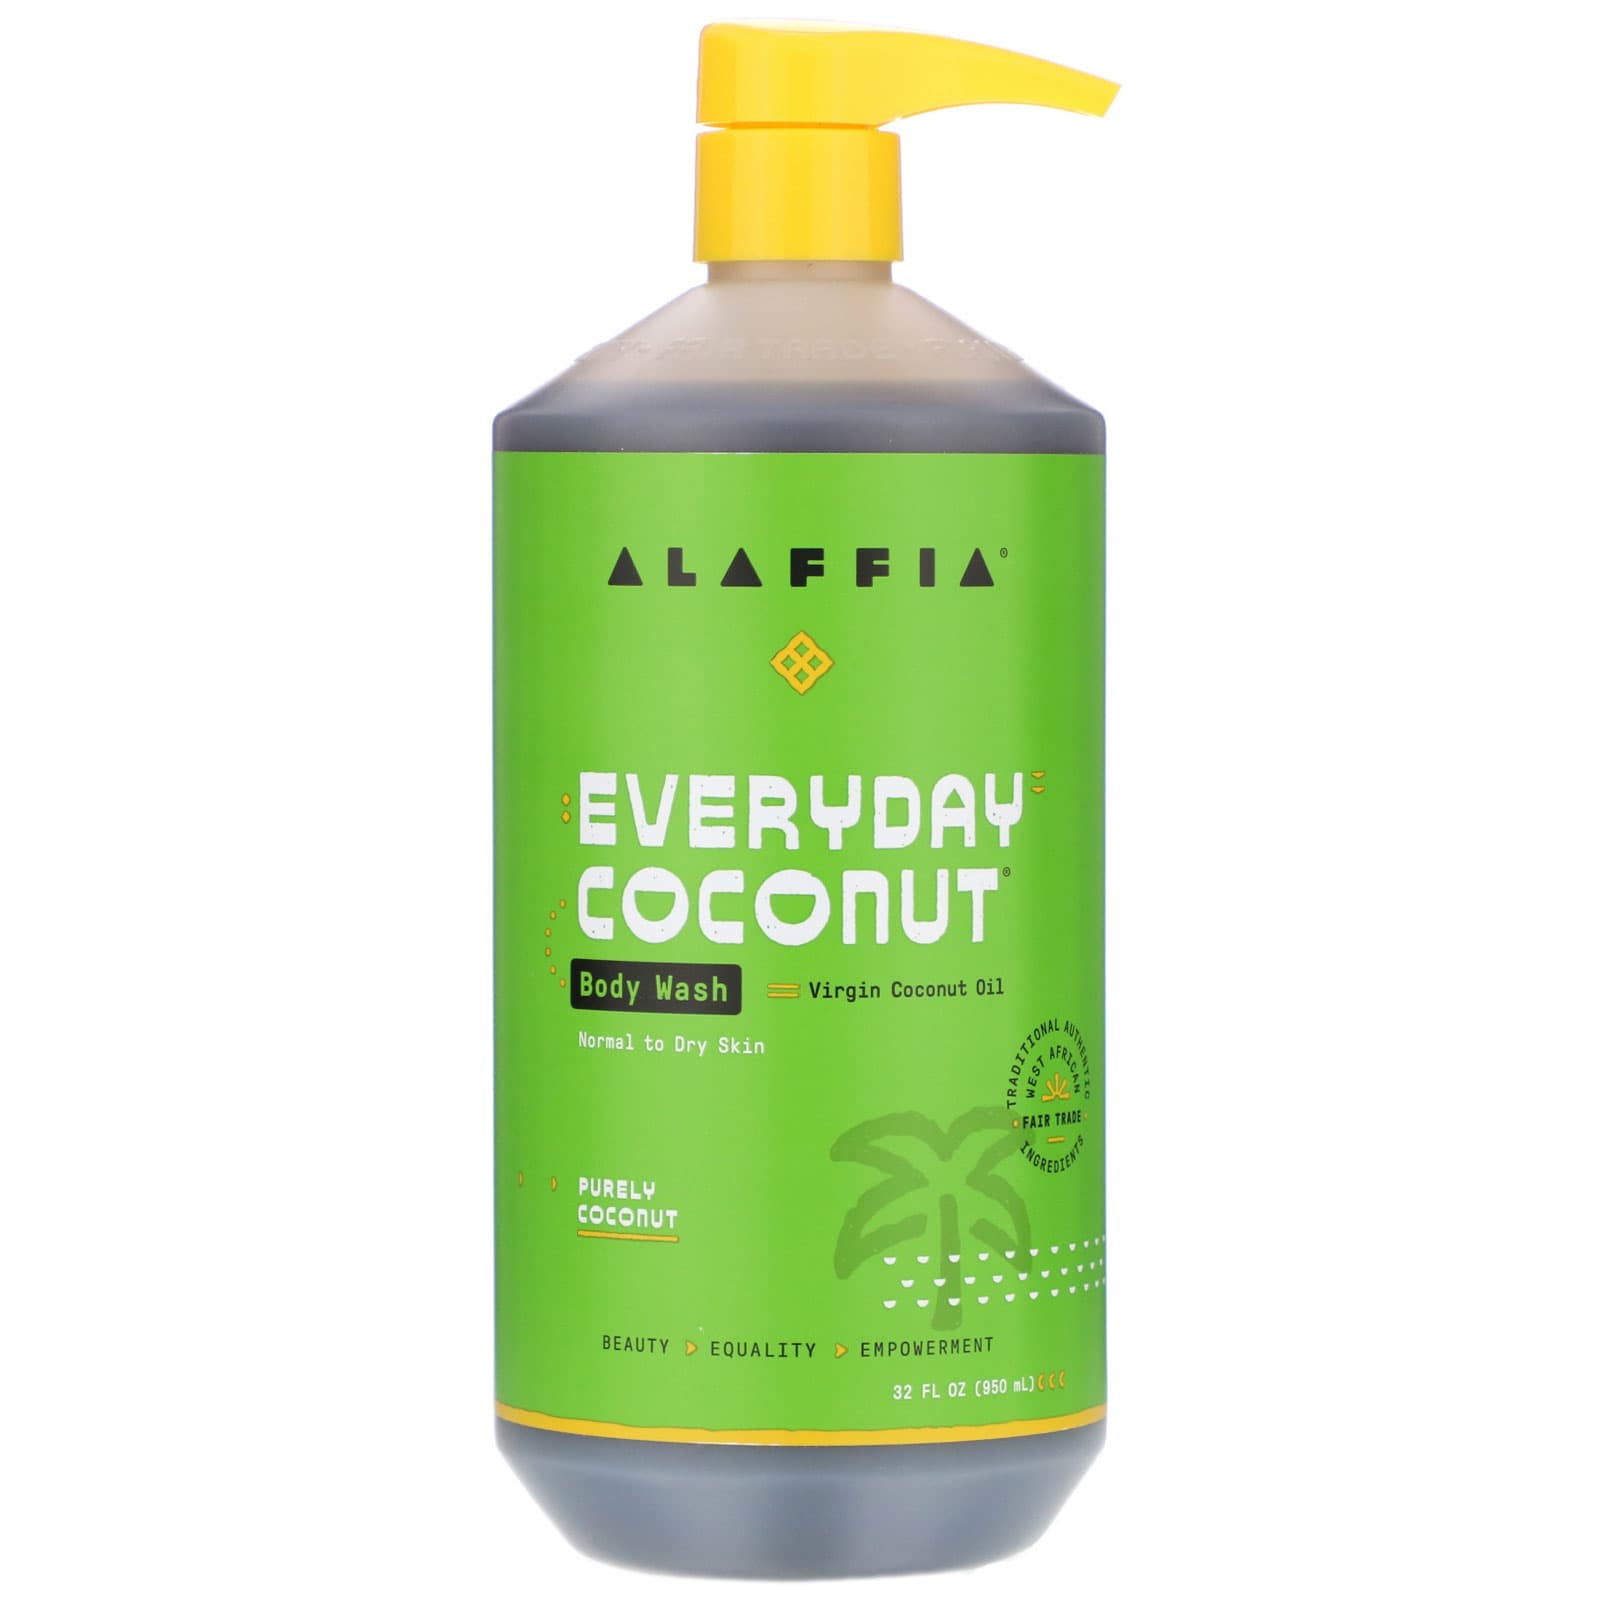 Alaffia, Everyday Coconut, Body Wash, Normal to Dry Skin, Purely Coconut(950 ml)